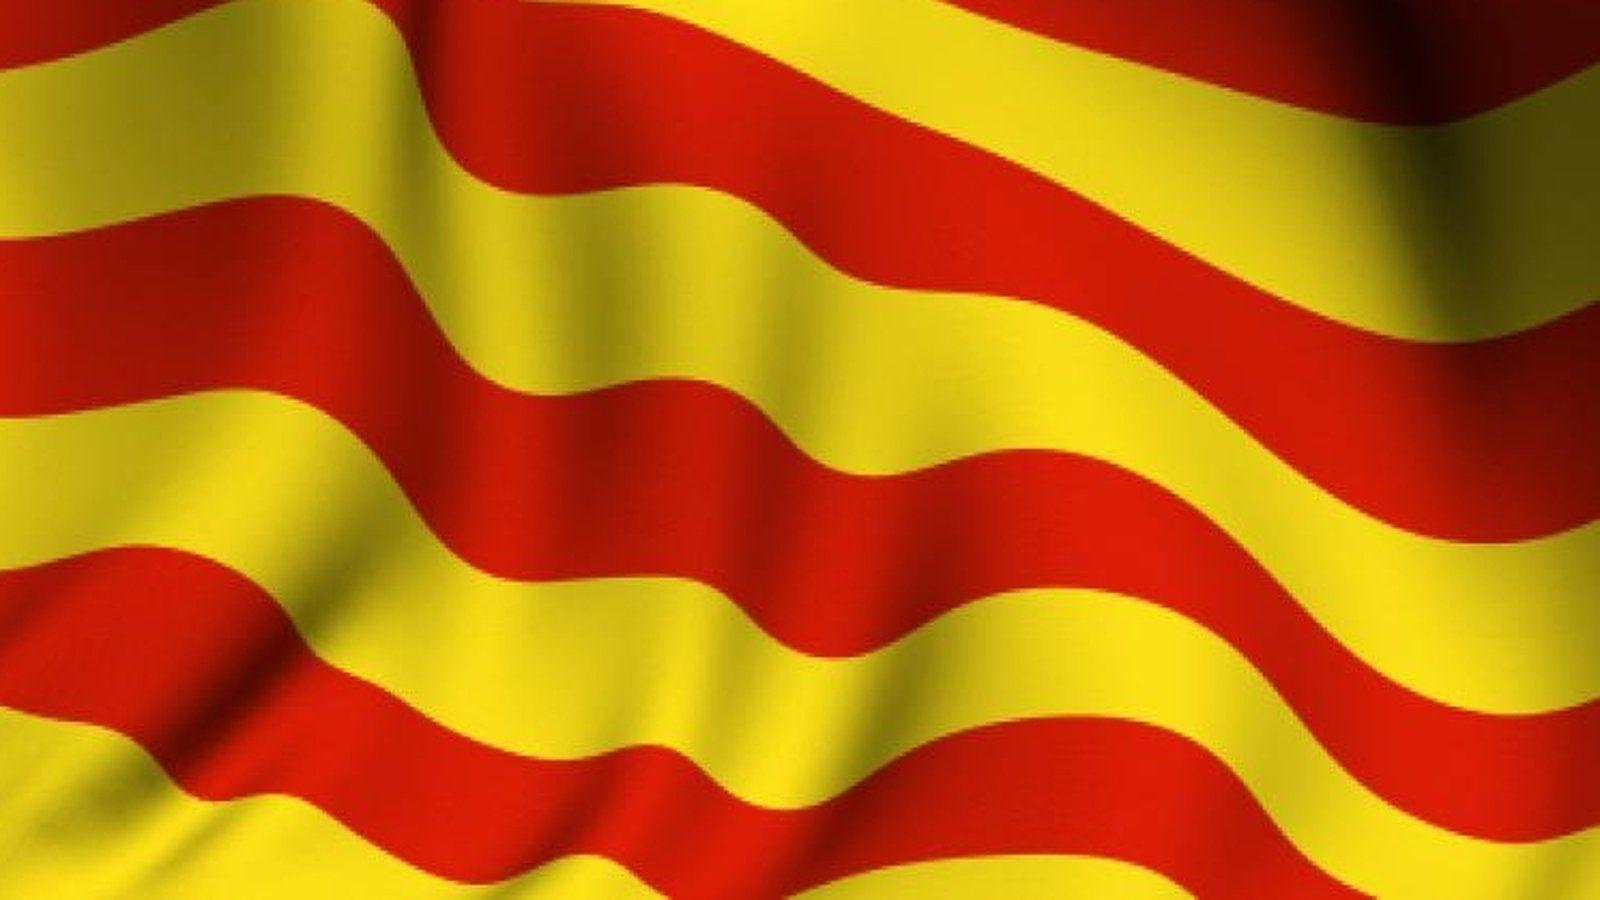 What is happening in Catalonia?